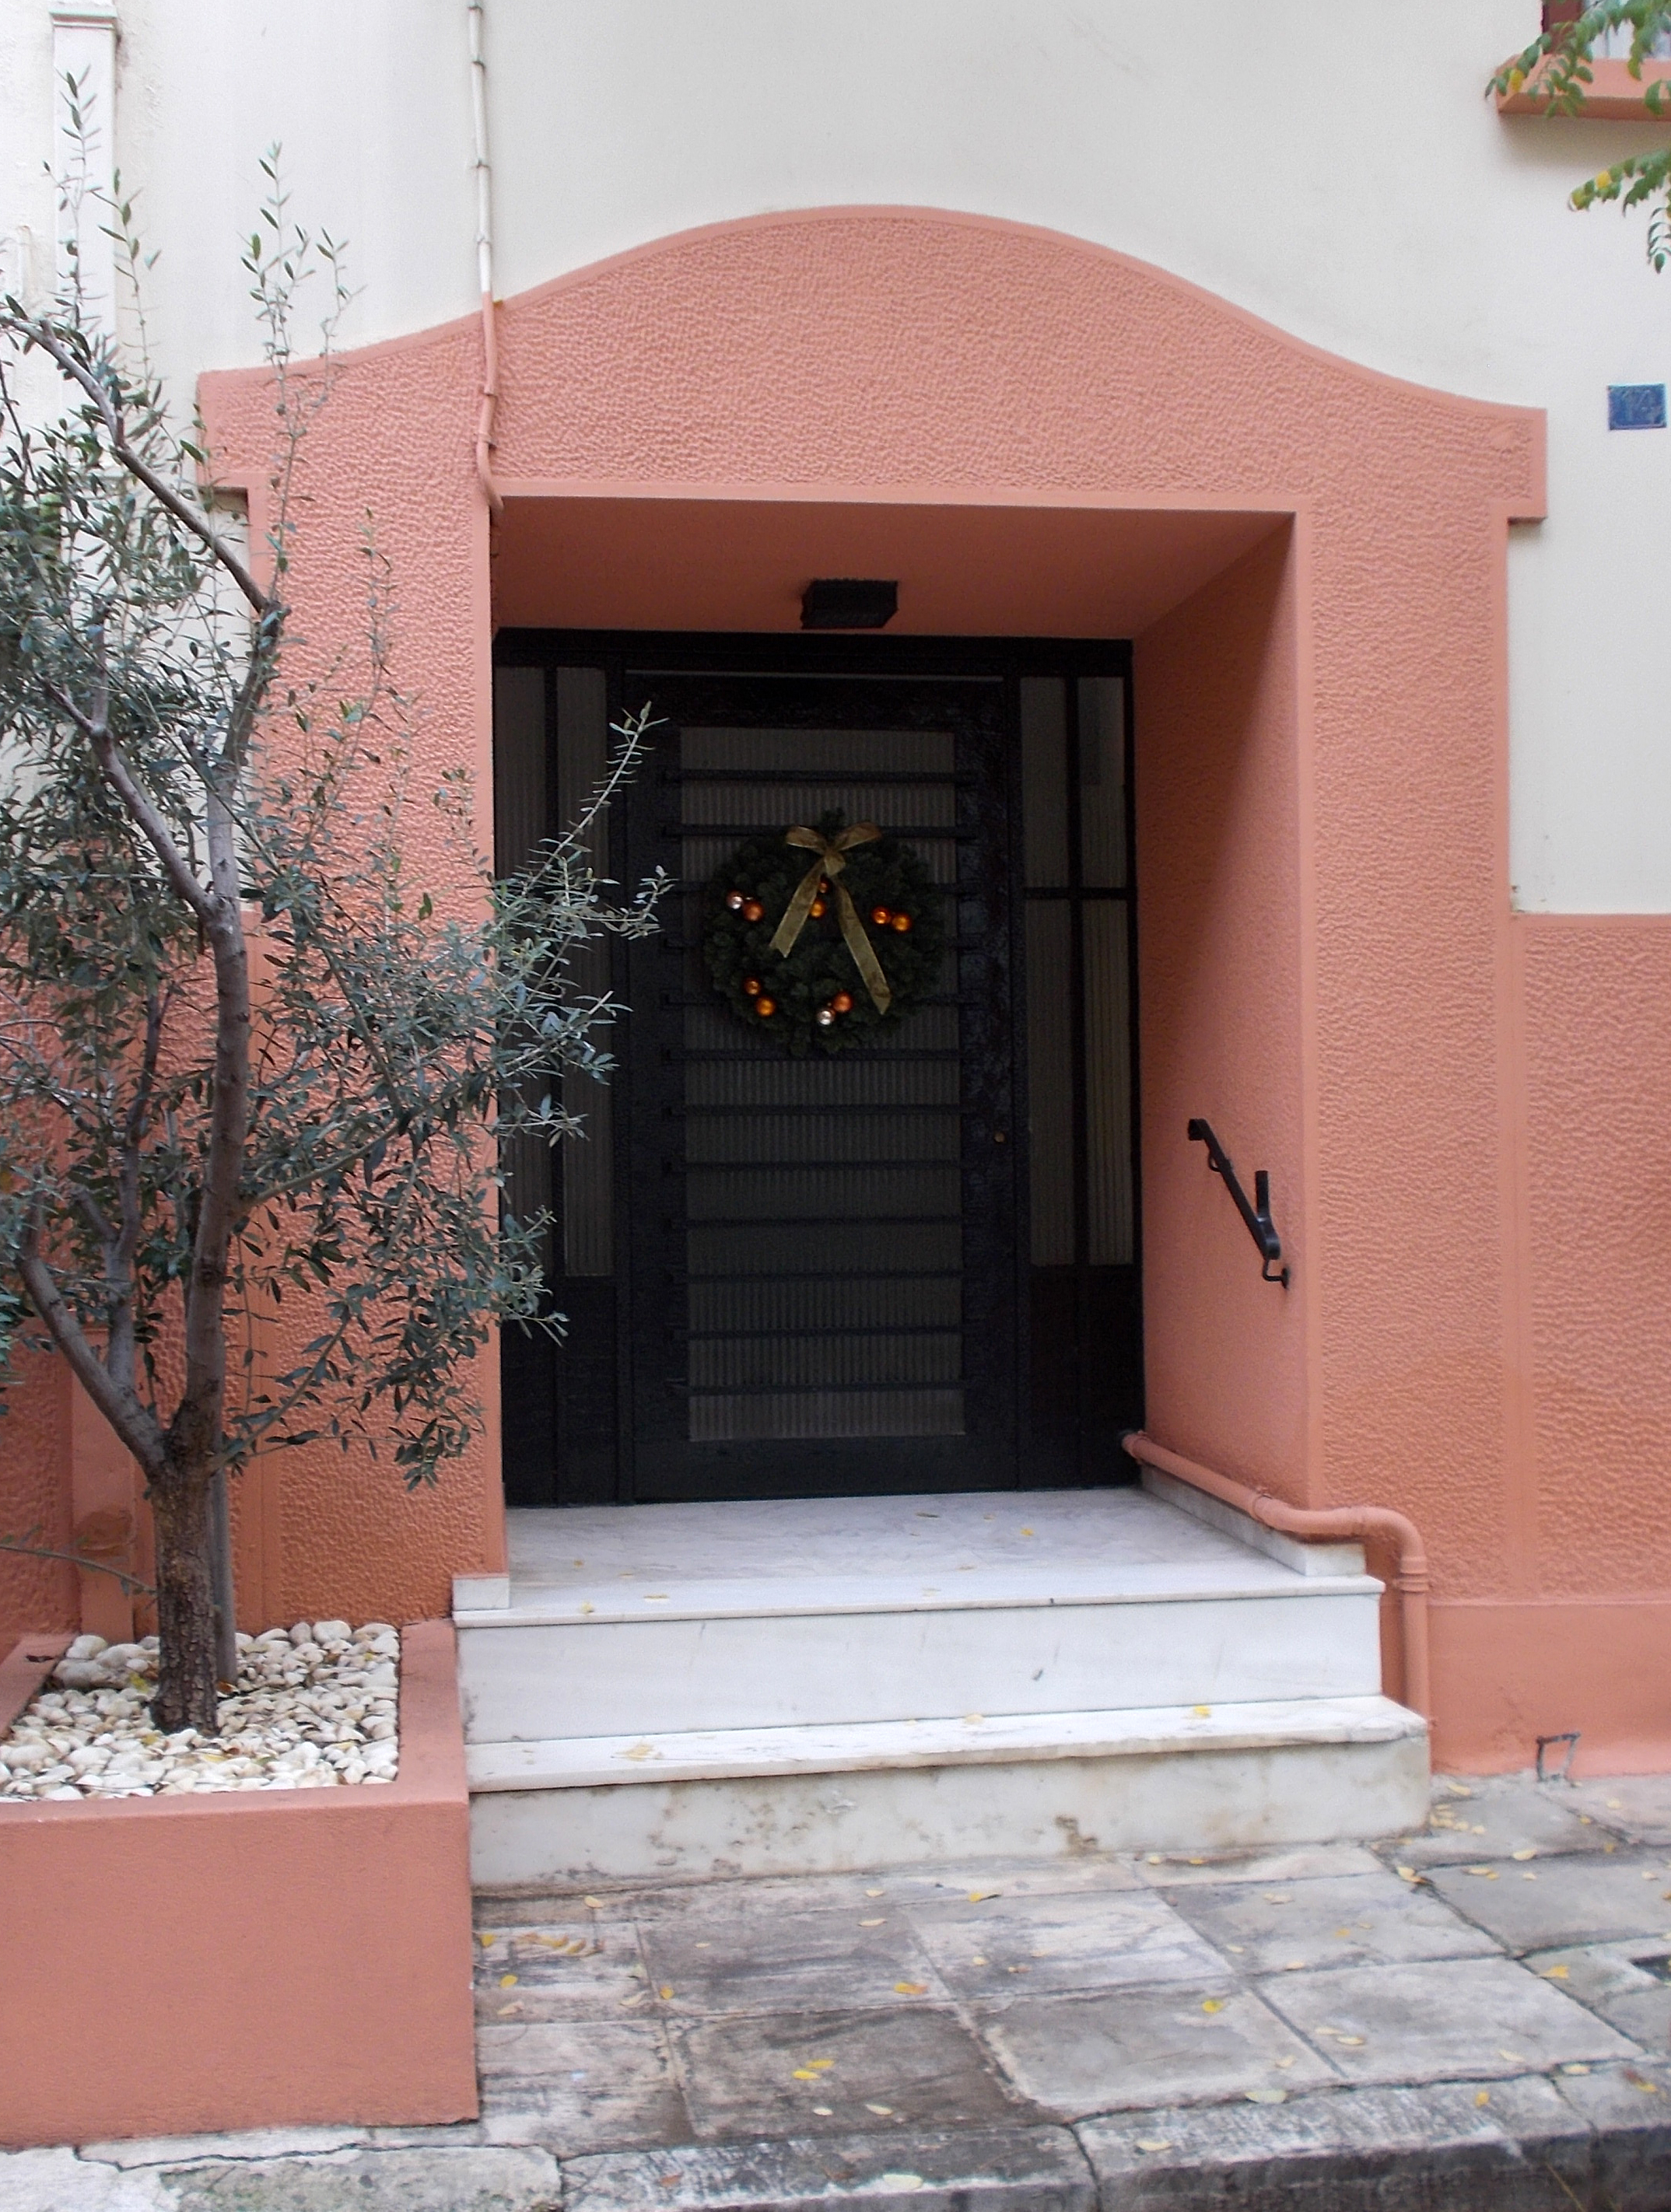 View of the eccentric entrance